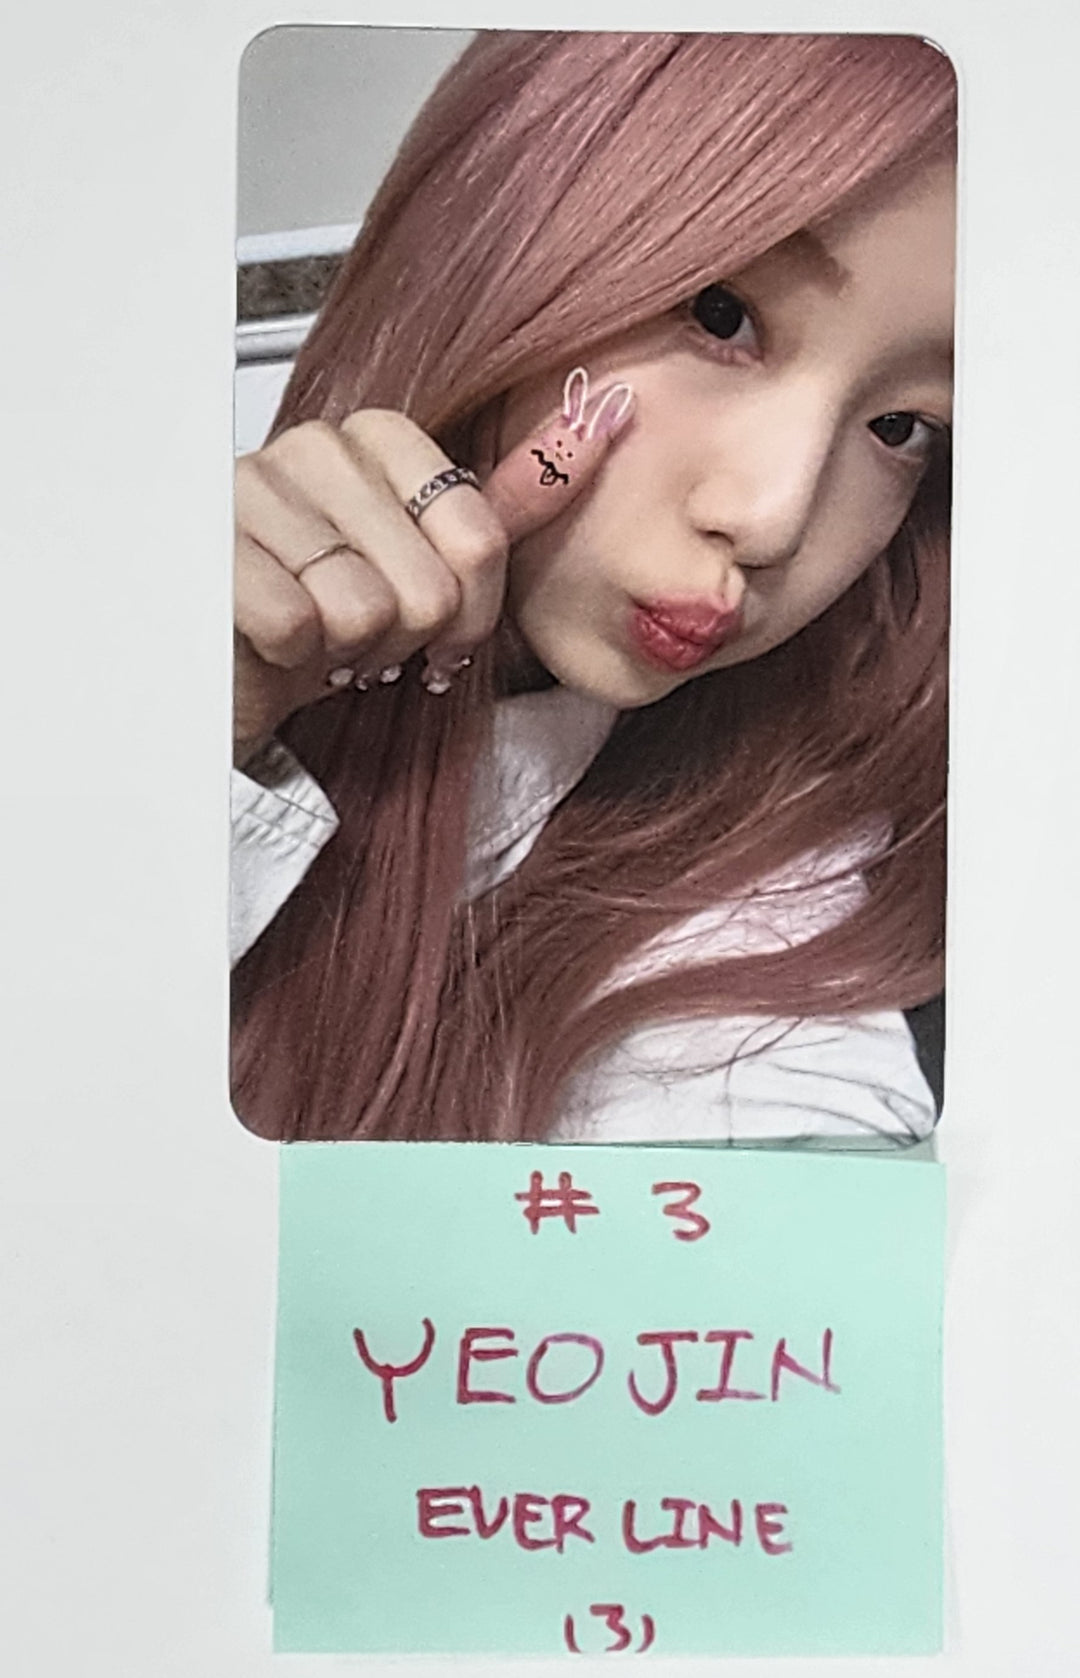 Loossemble "One of a Kind" - Everline Fansign Event Photocard Round 2 [Ever Music Ver.] [24.5.24]